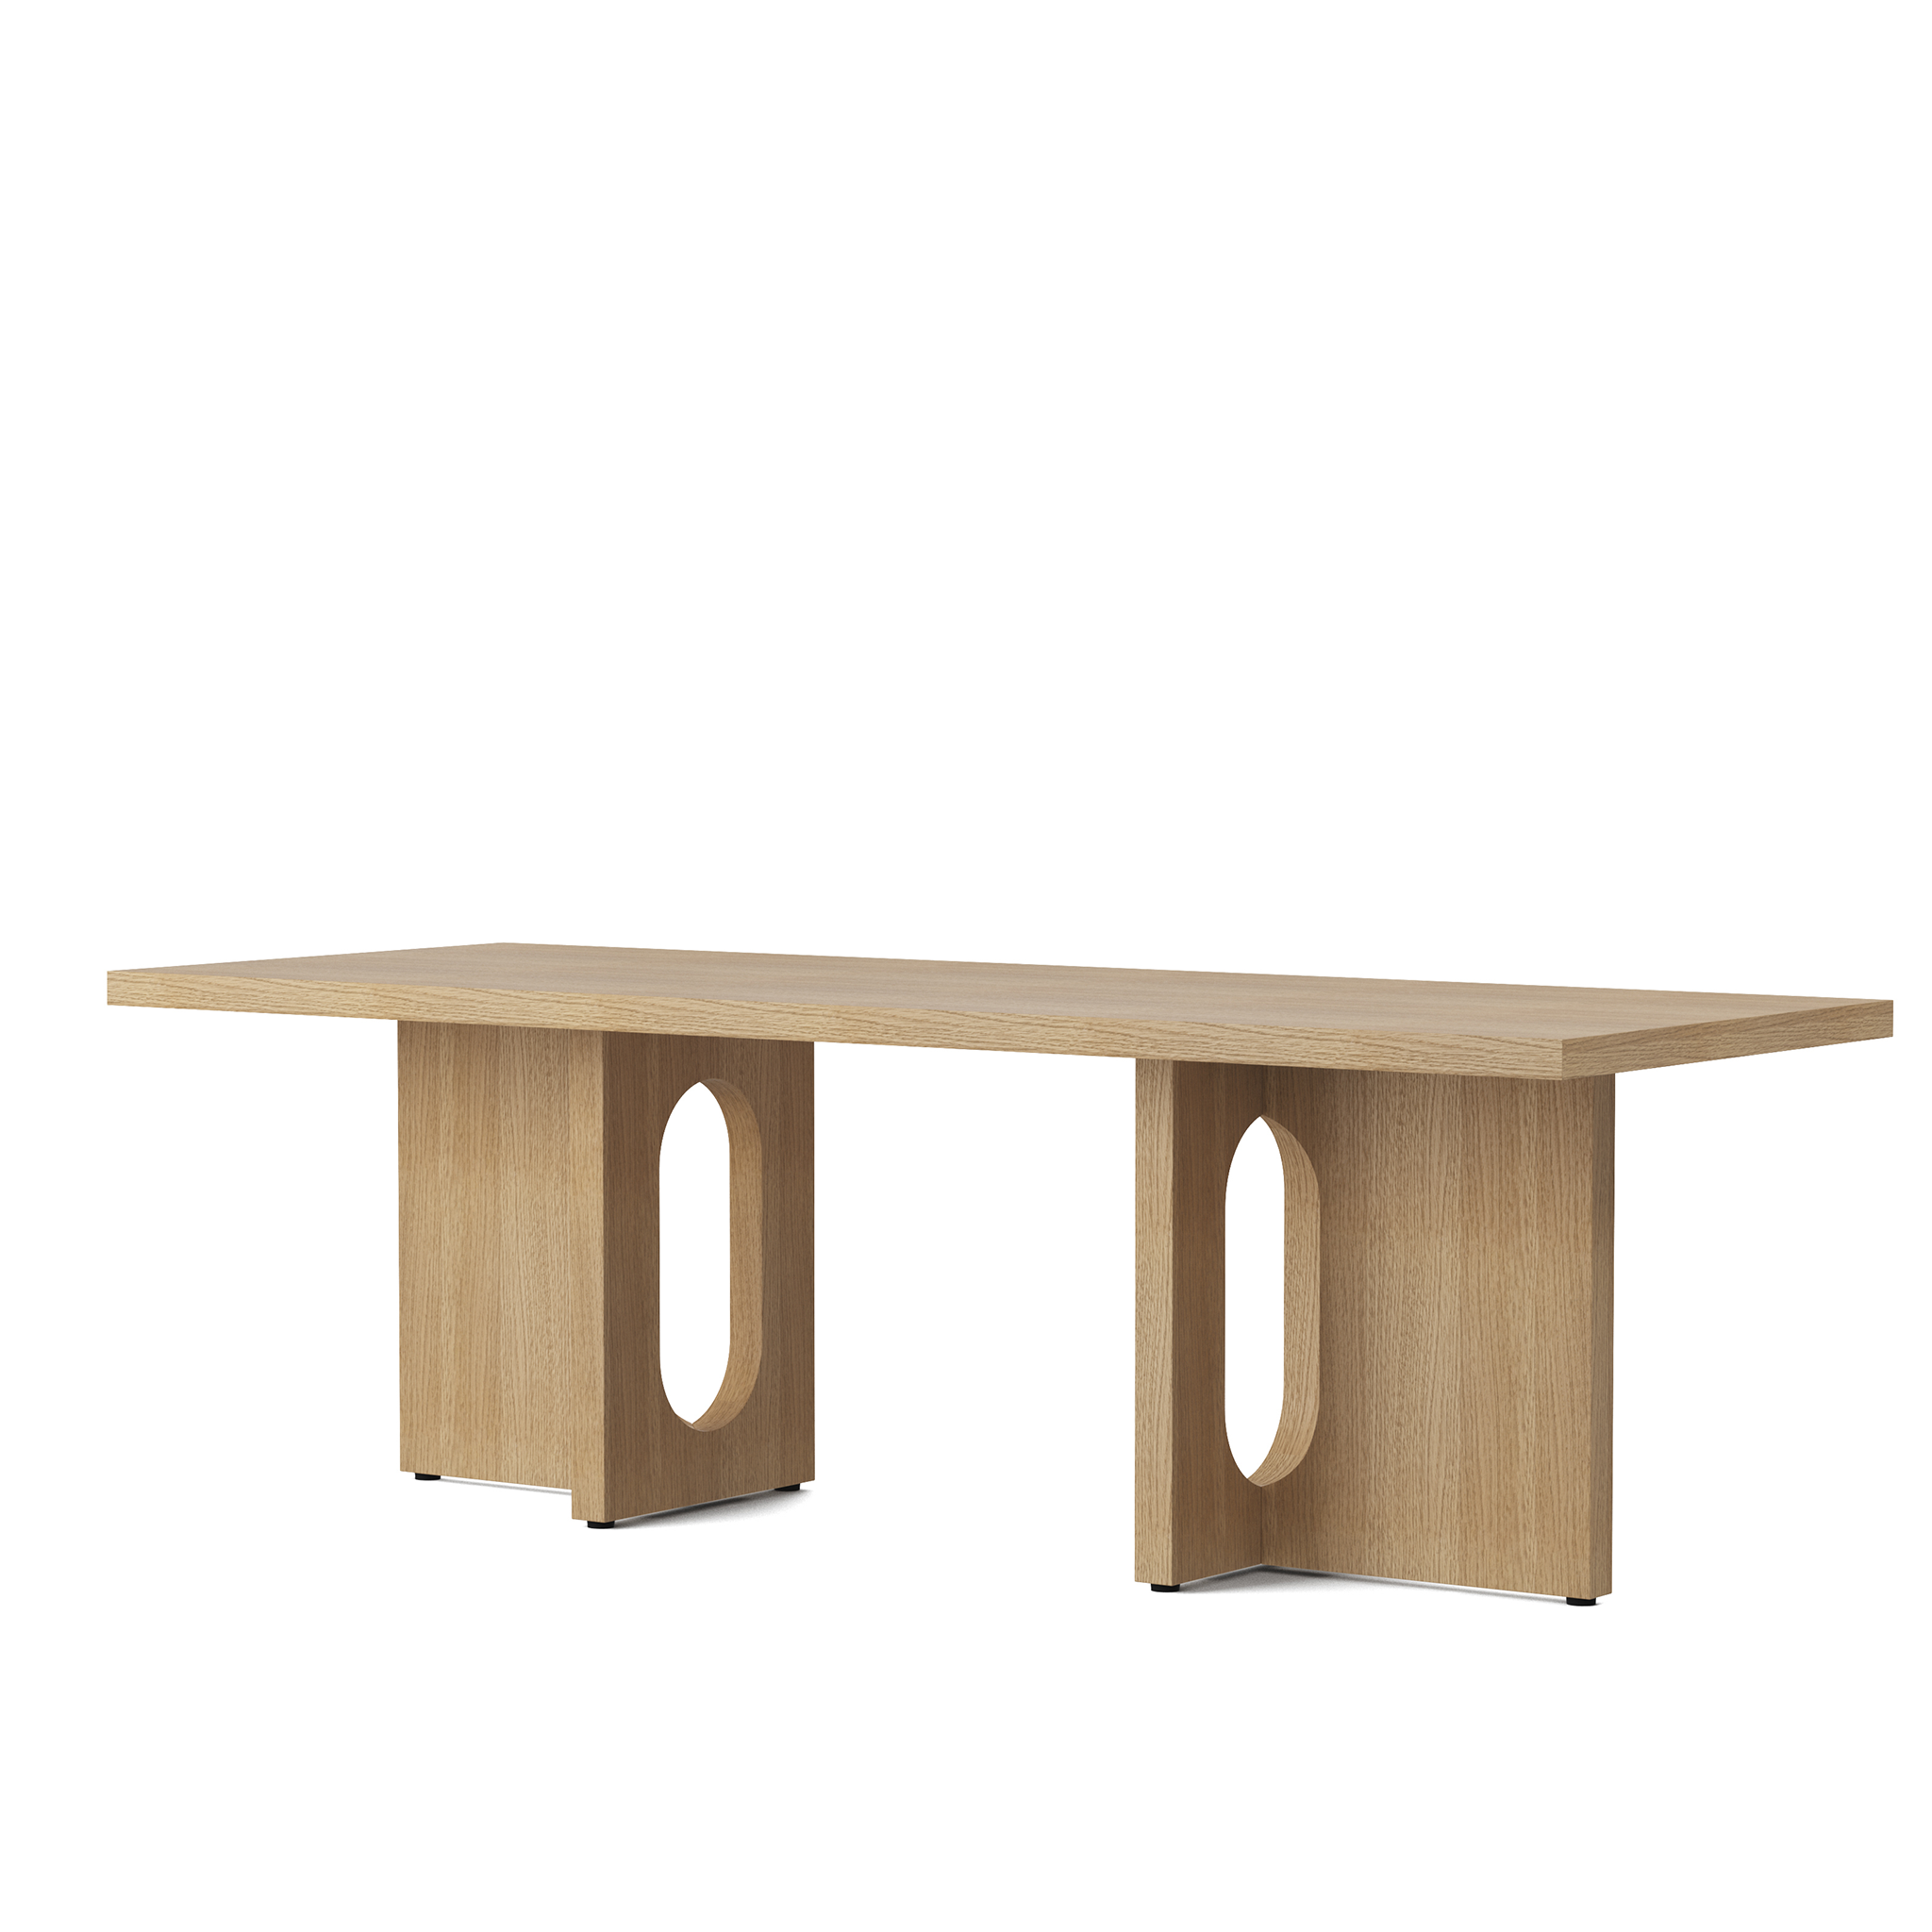 Androgyne Lounge Table - Wood by Danielle Siggerud